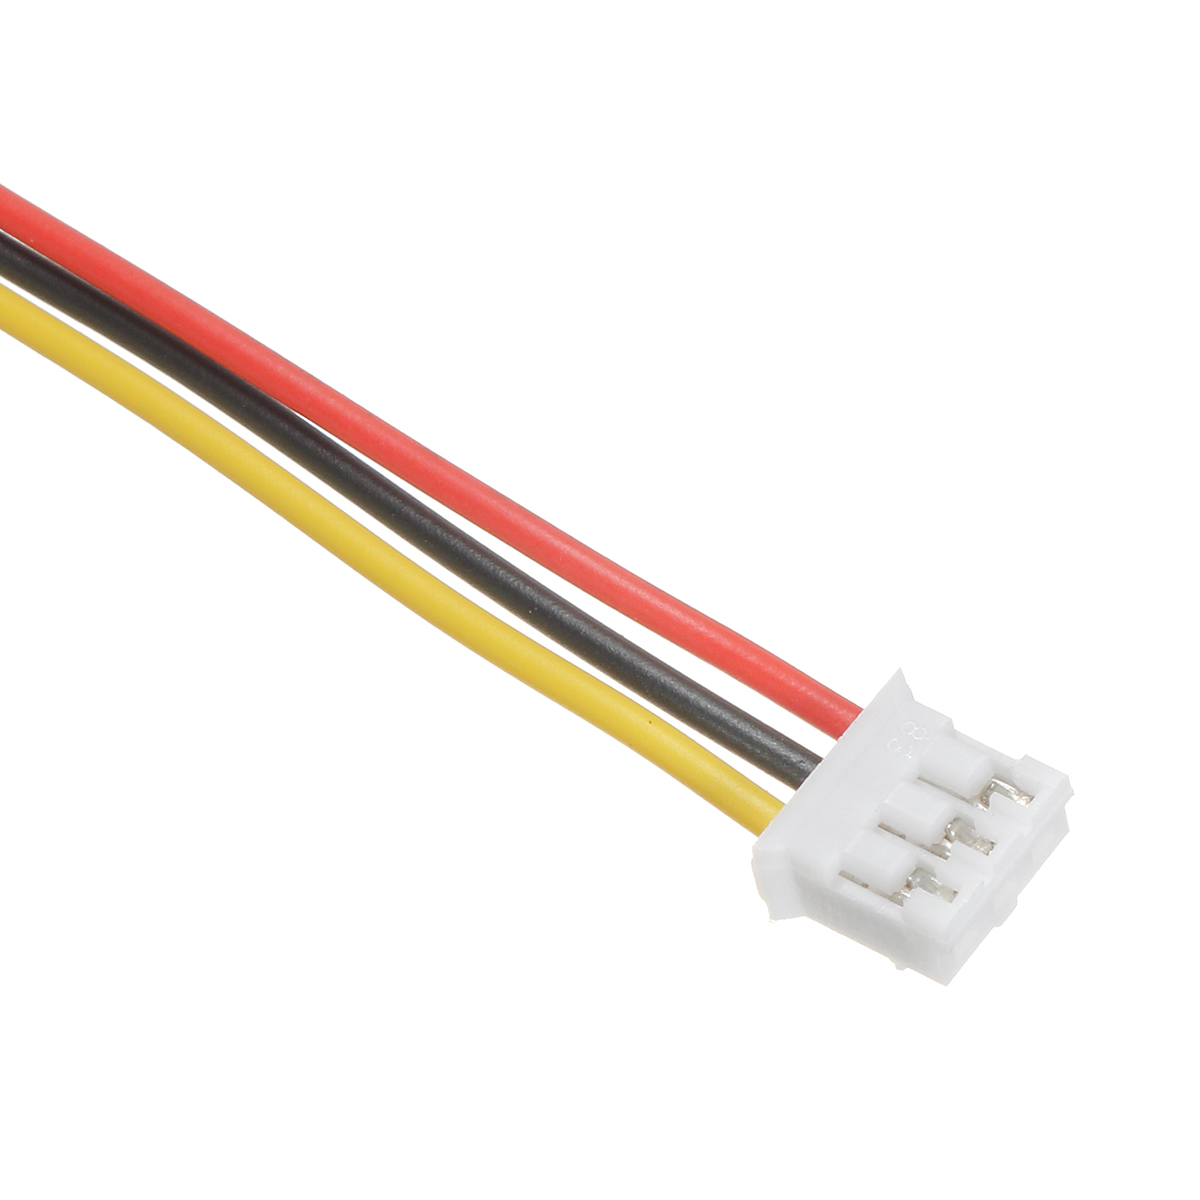 Excellwayreg-20Pcs-Mini-Micro-JST-20-PH-3-Pin-Connector-Plug-With-30cm-Wires-Cables-1147294-4